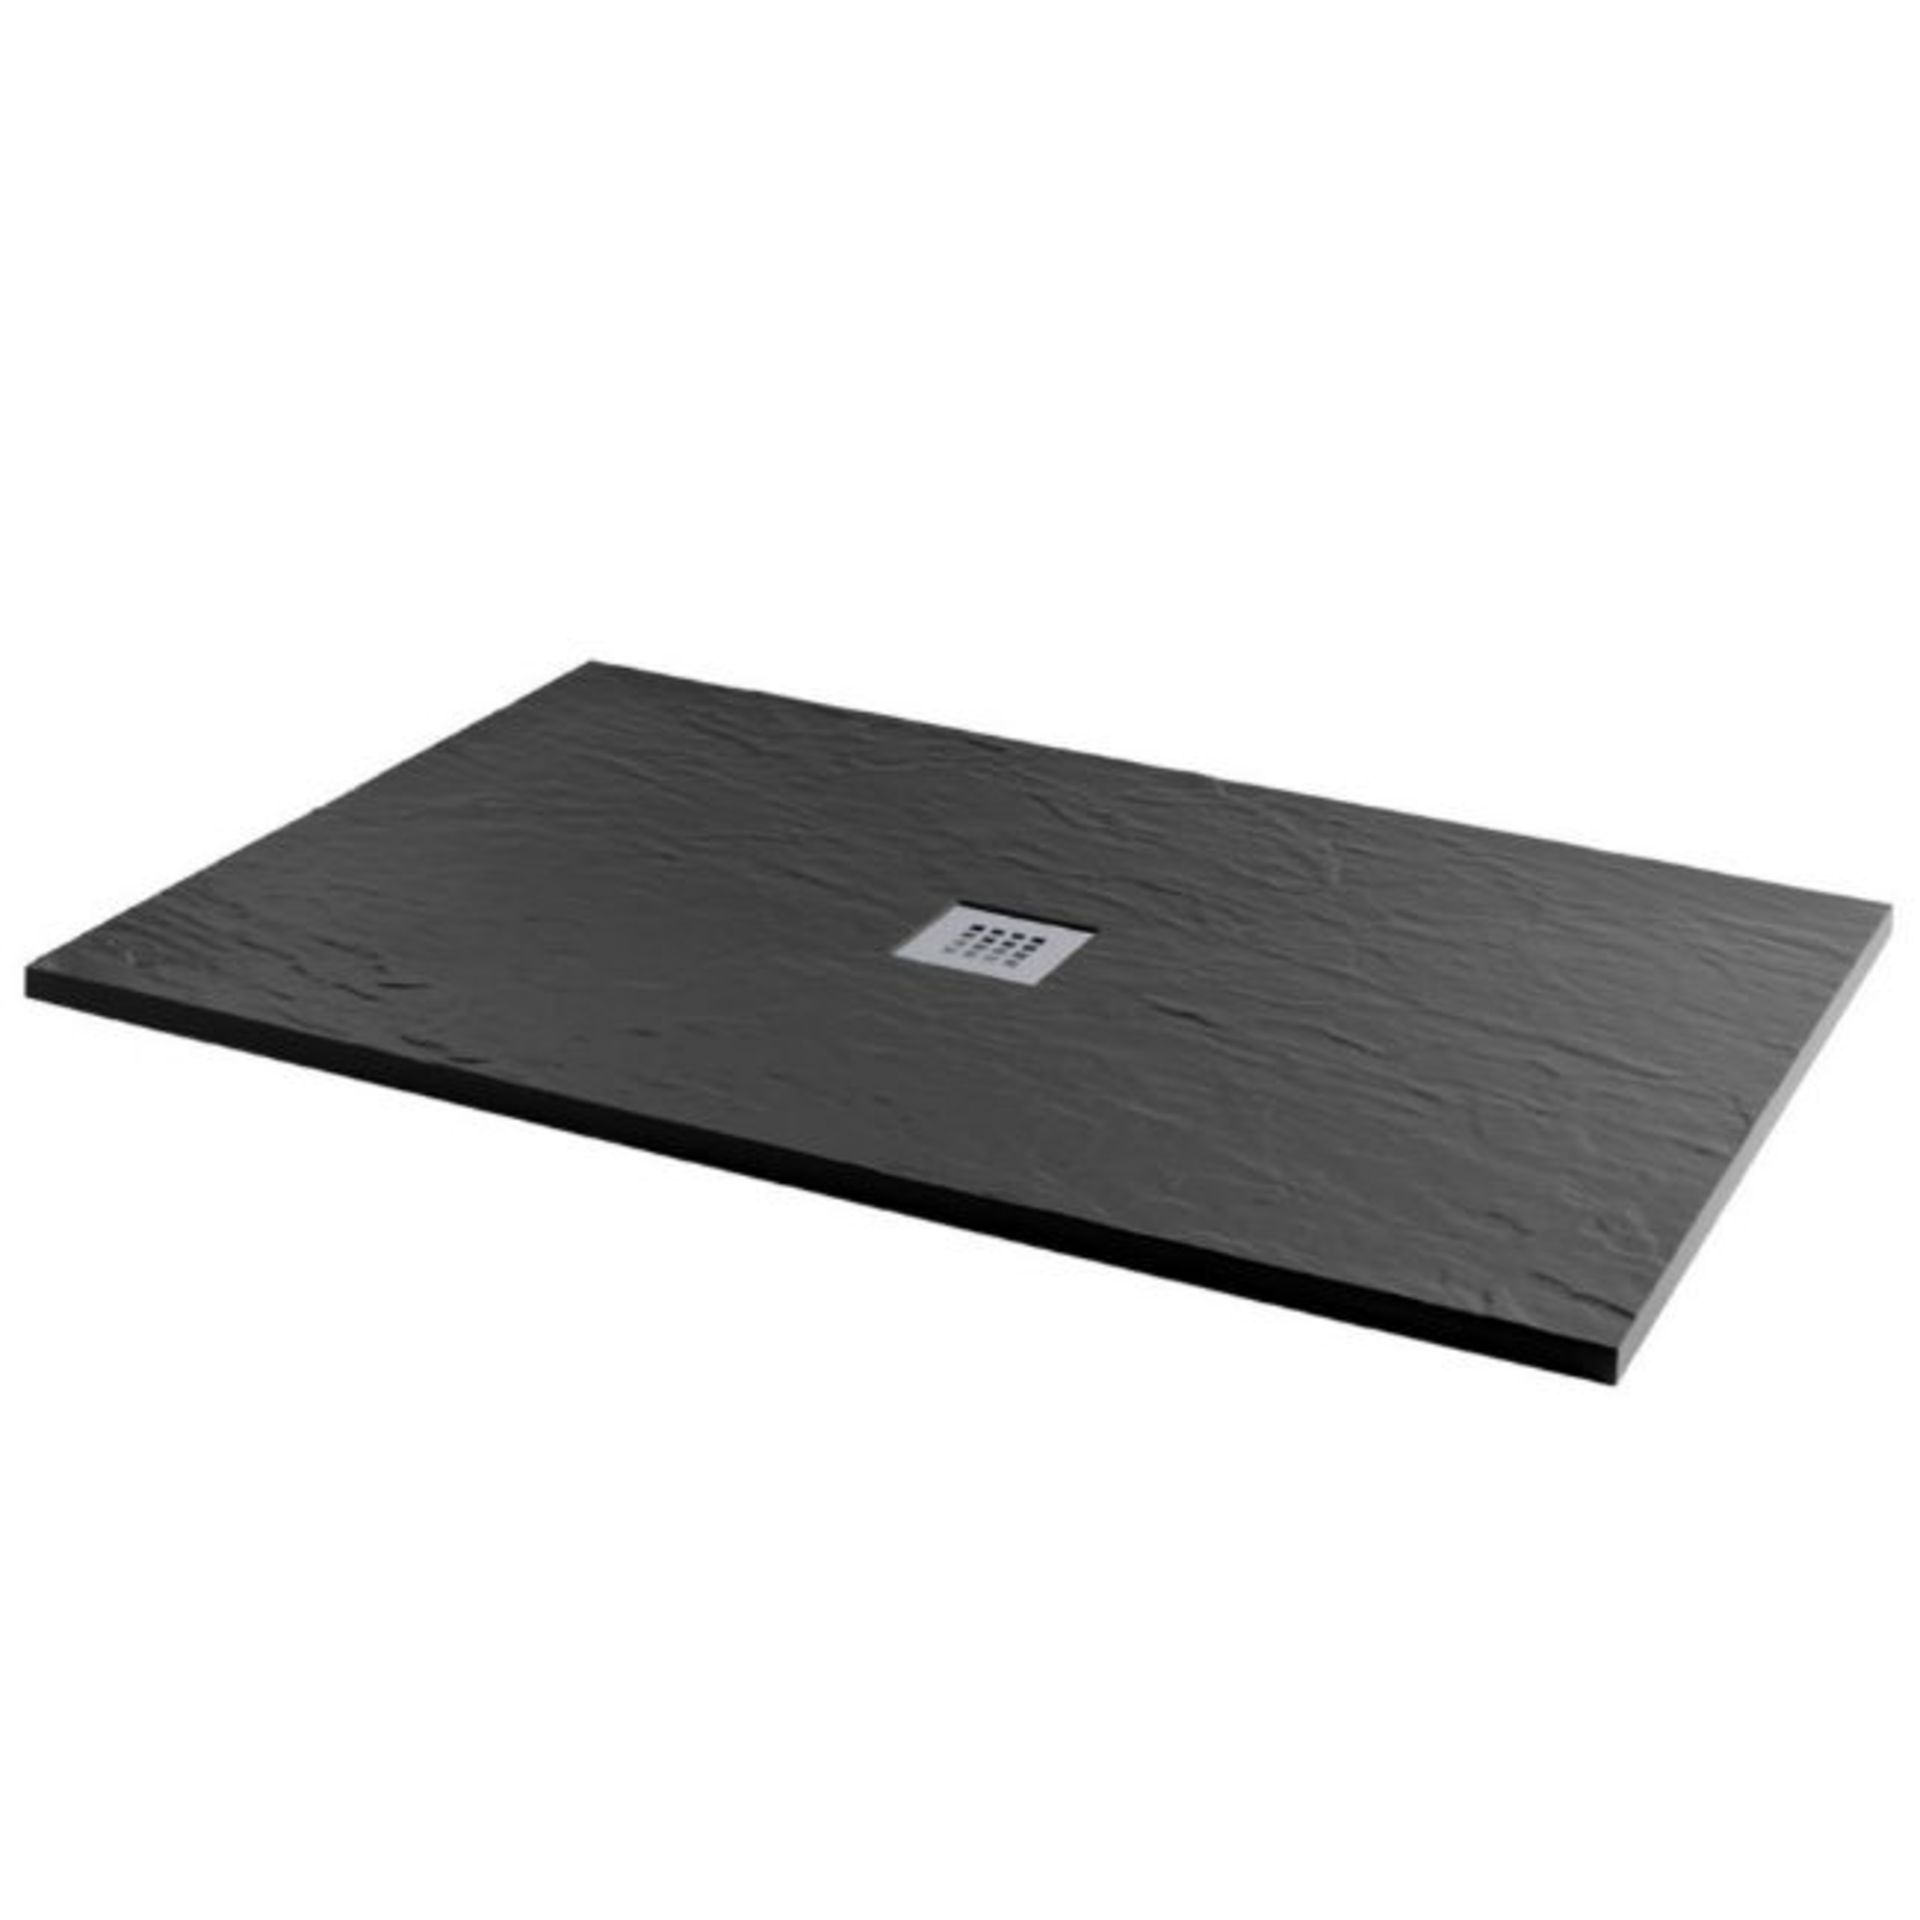 New 1400x800mm Rectangle Black Slate Effect Shower Tray. RRP £549.99.A Textured Black Slate E... - Image 2 of 3